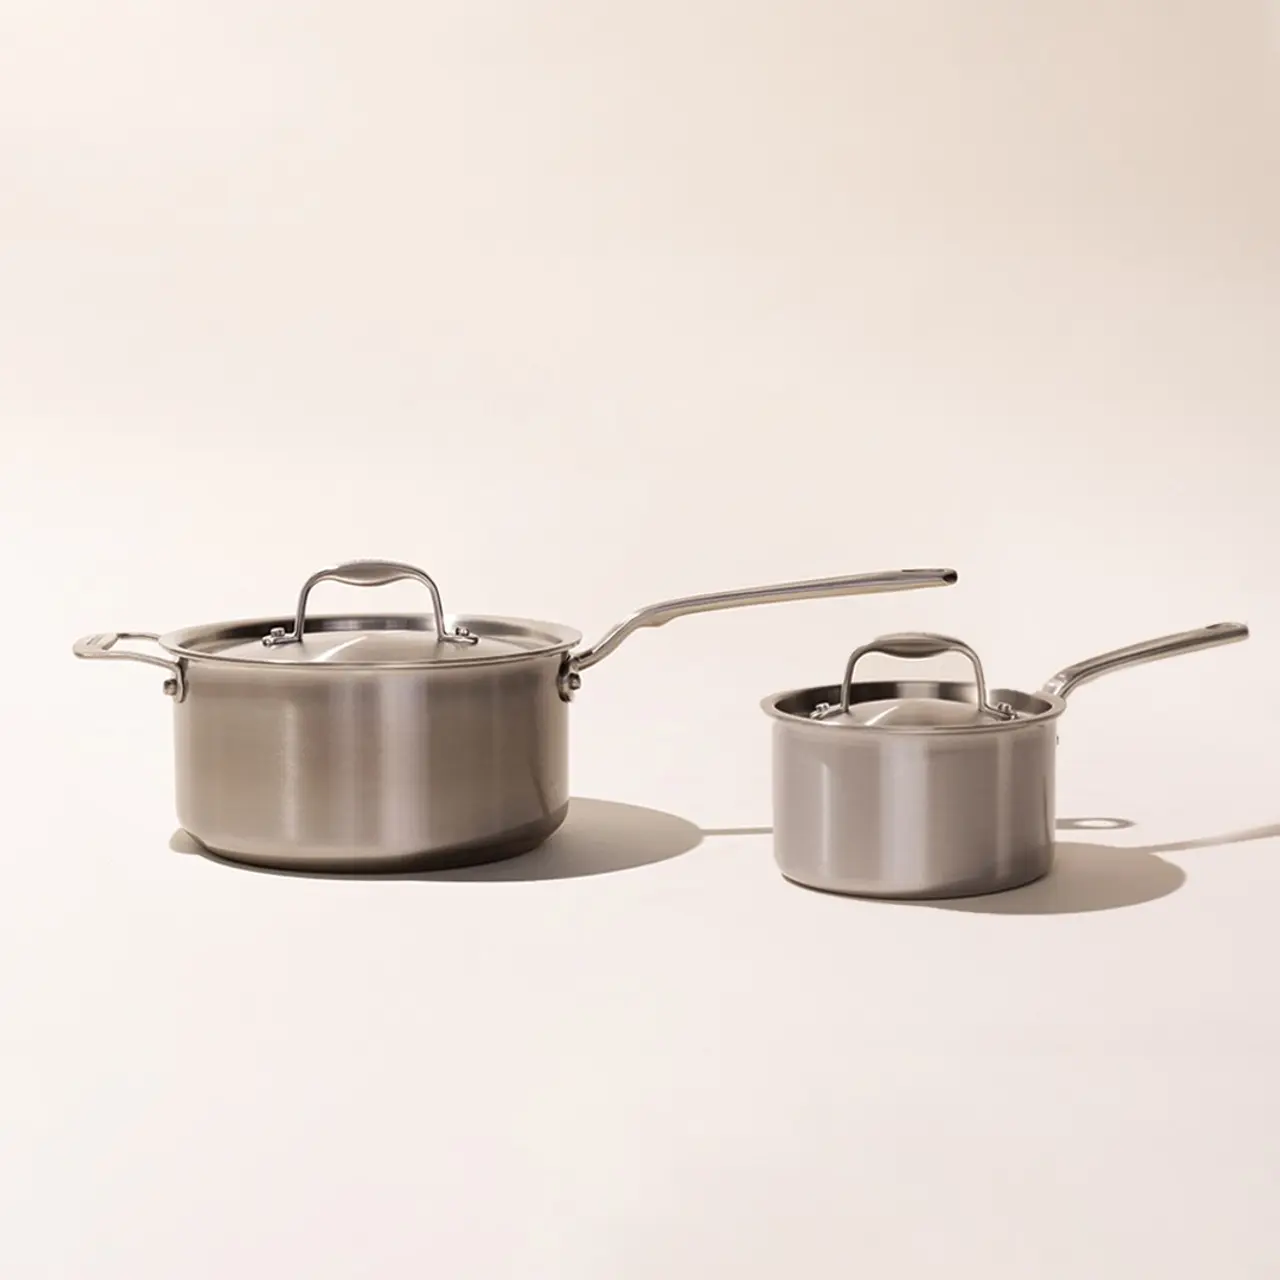 Two stainless steel pots with lids and long handles on a neutral background.